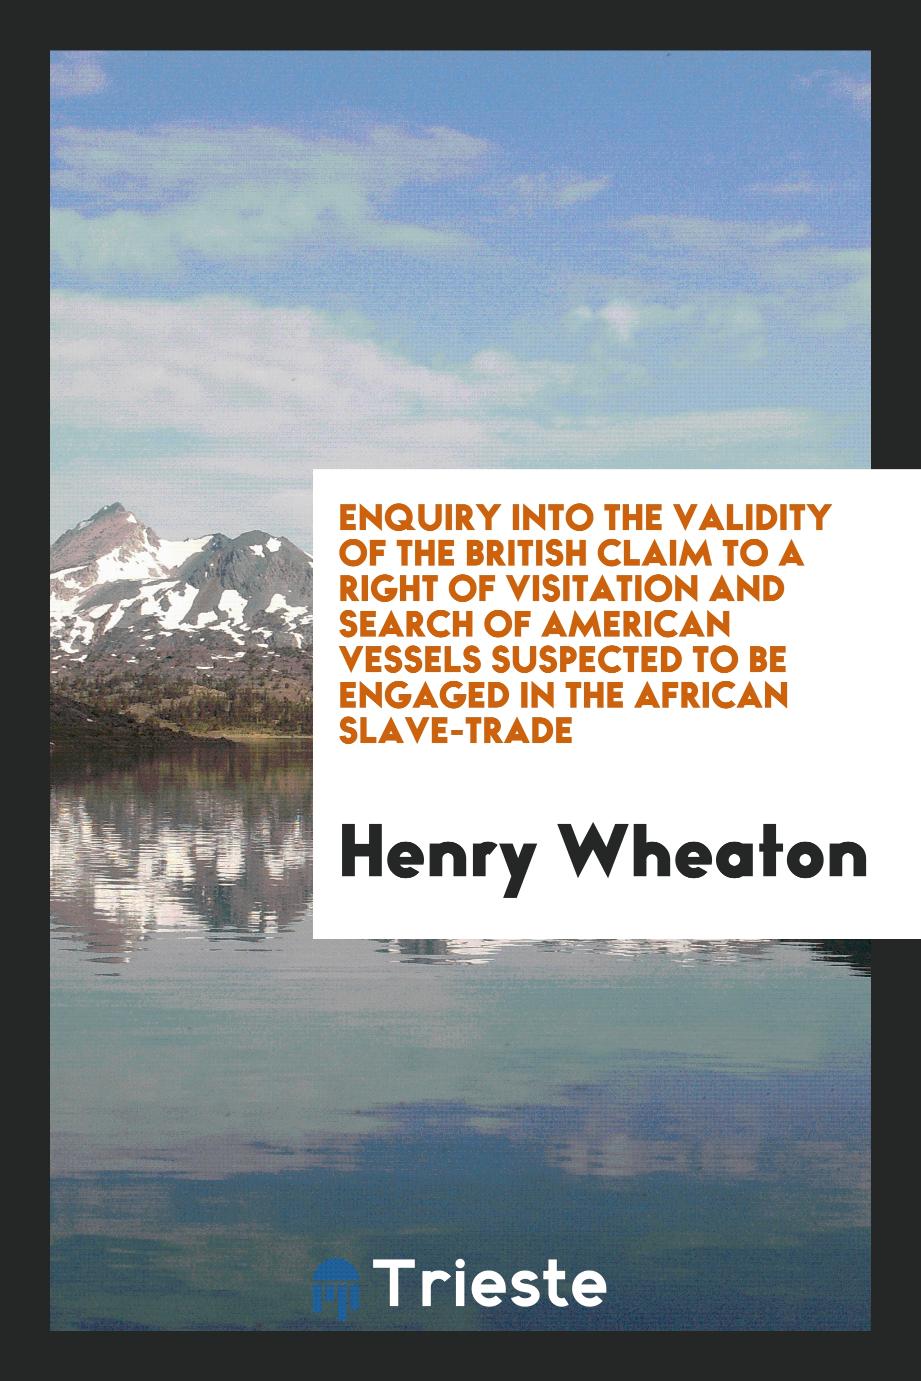 Enquiry into the Validity of the British Claim to a Right of Visitation and Search of American Vessels Suspected to Be Engaged in the African Slave-Trade